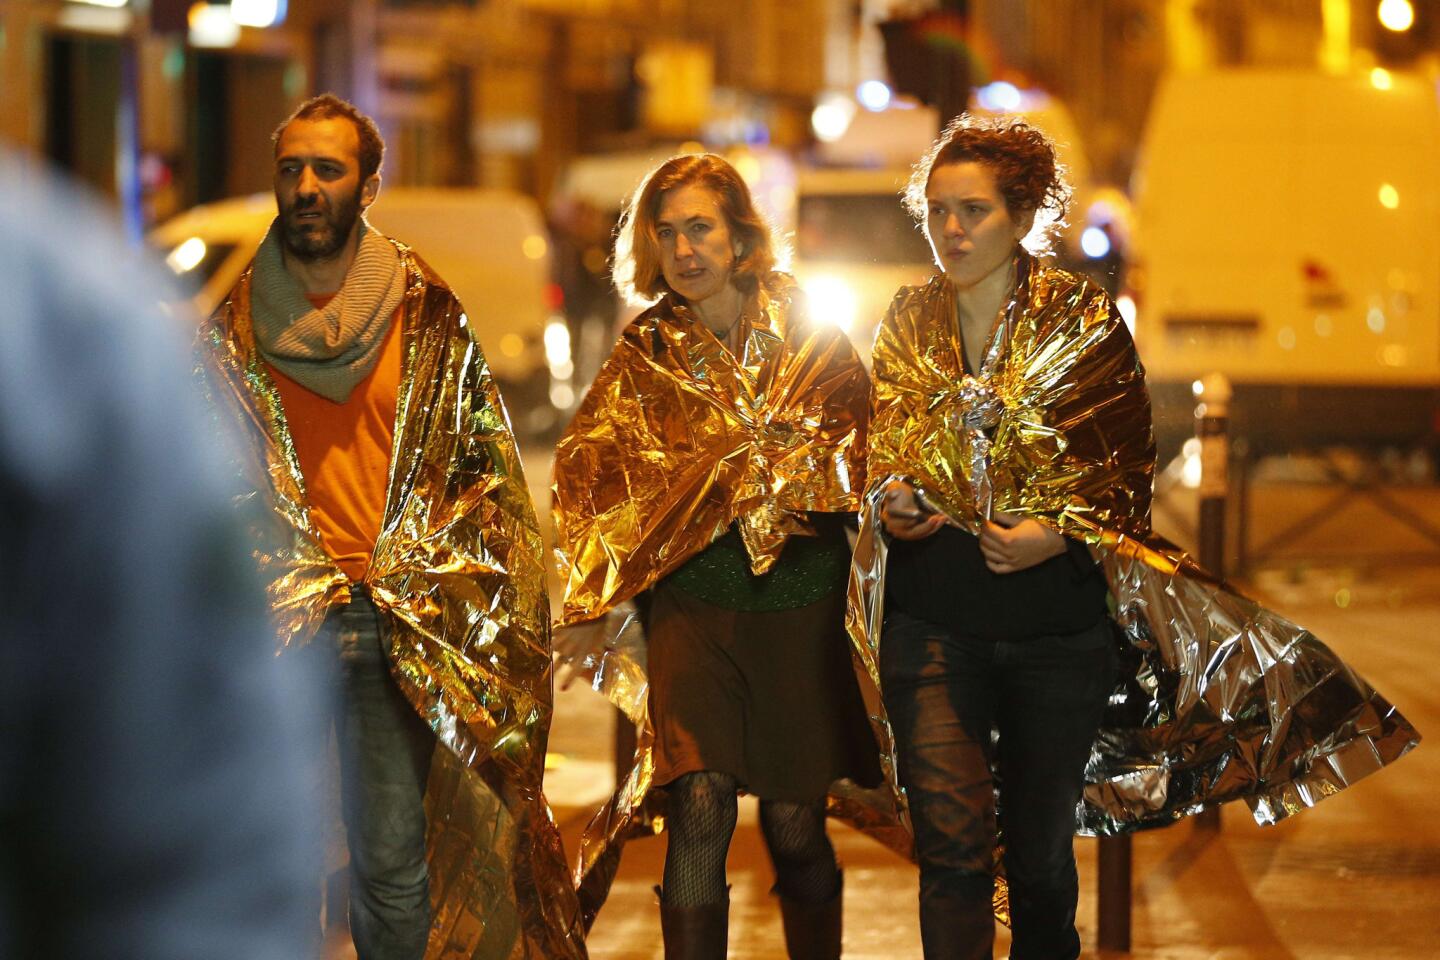 People wrapped in emergency blankets walk near the Bataclan concert hall early on Nov. 14, 2015, in Paris.